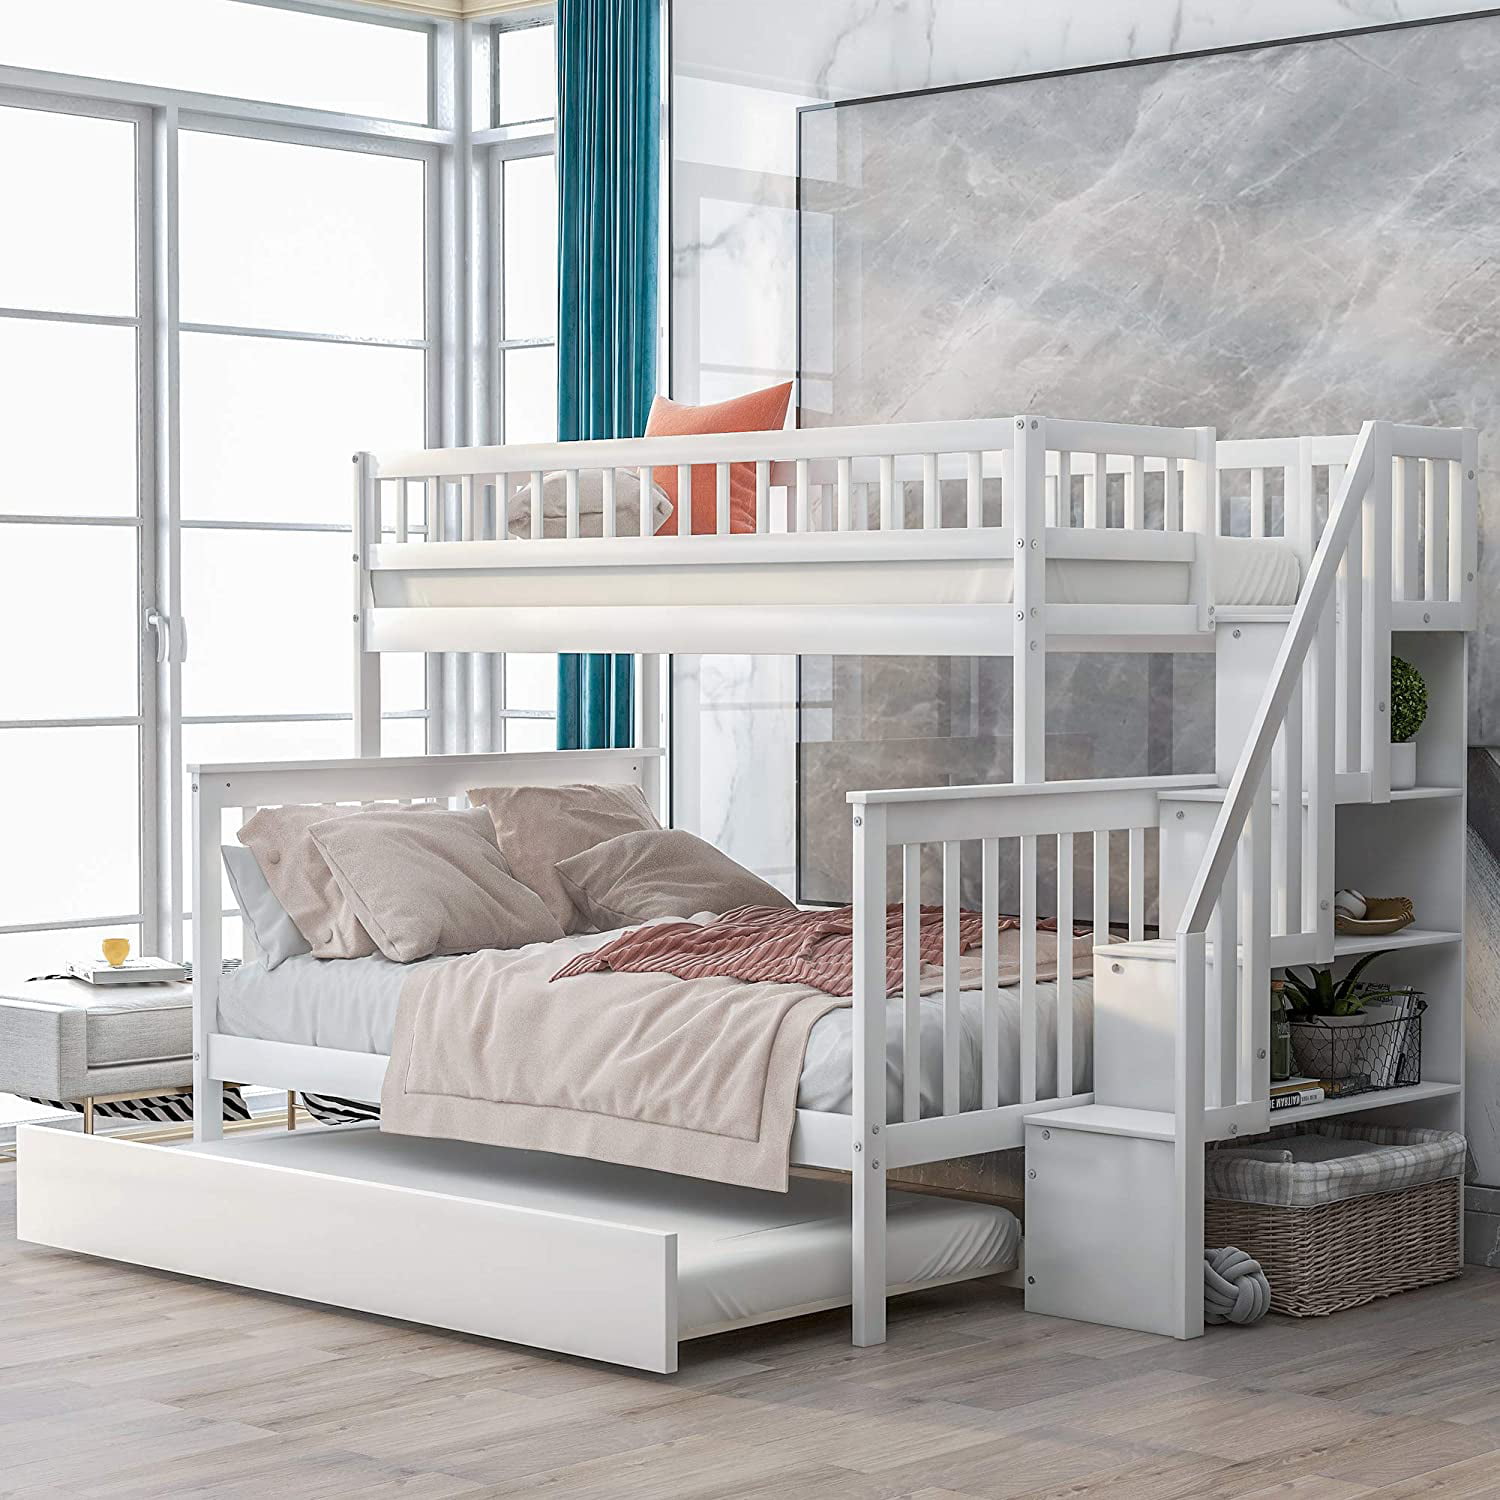 Piscis Bunk Bed Beds Twin Over, Twin Size Bunk Beds With Trundle